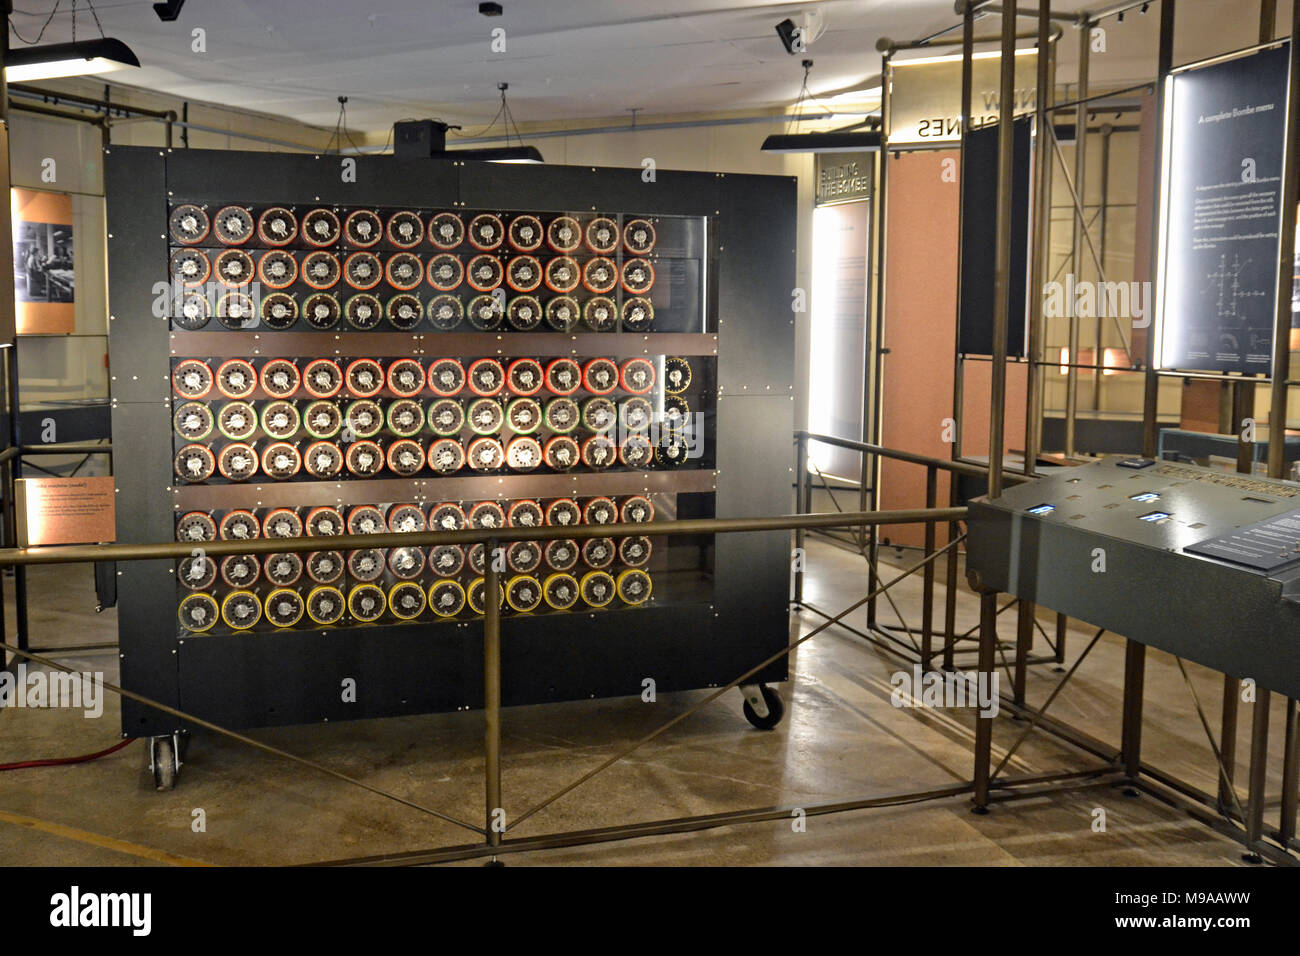 Milton Keynes, UK. 23rd March, 2018. Replica Bombe machine at The Bombe Breakthrough exhibition at Bletchley Park - opening 24 March 2018 Credit: Susie Kearley/Alamy Live News Stock Photo